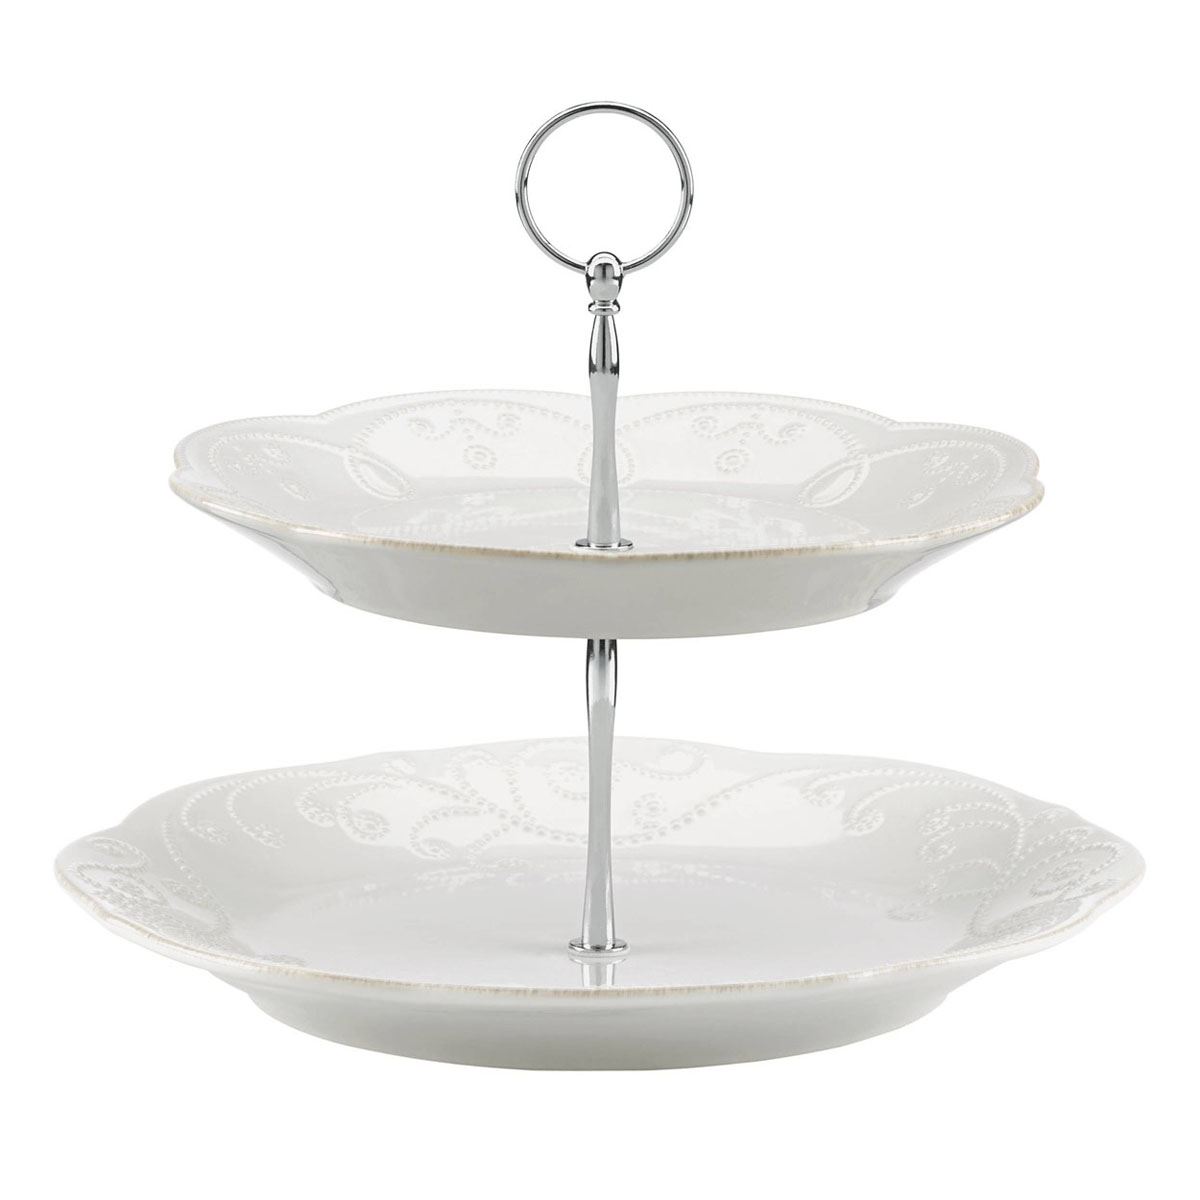 Lenox(R) French Perle White(tm) 2-Tiered Server